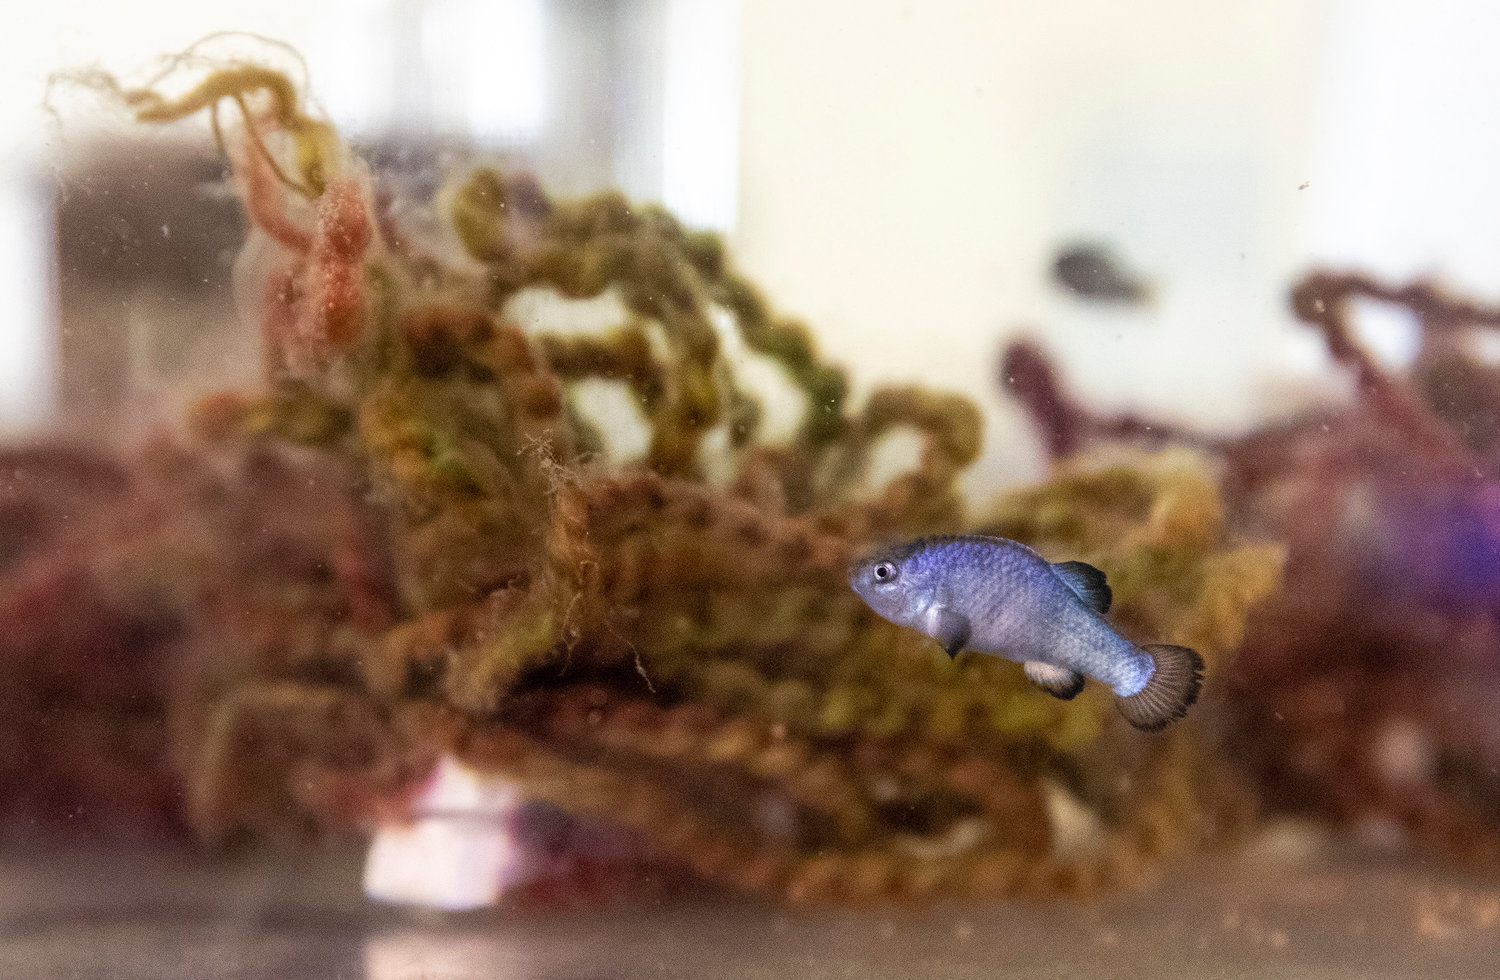 A Devil's Hole pupfish swims in a propagation aquarium at the Ash Meadows Fish Conservation Facility, Friday, April 29, 2022, in Ash Meadows National Wildlife Refuge, Nevada. (Brian van der Brug/Los Angeles Times/TNS)